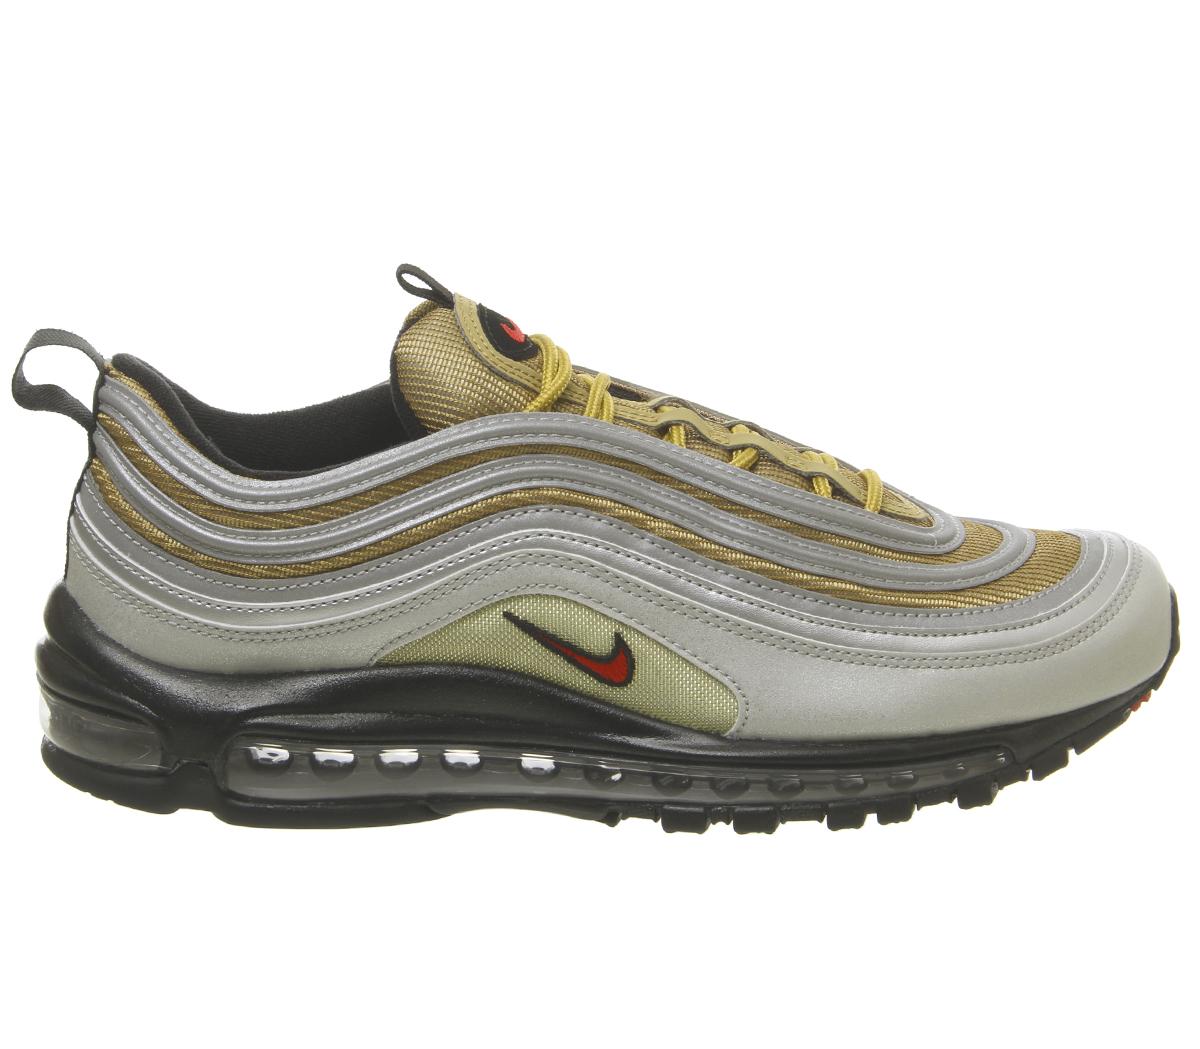 silver and gold 97s